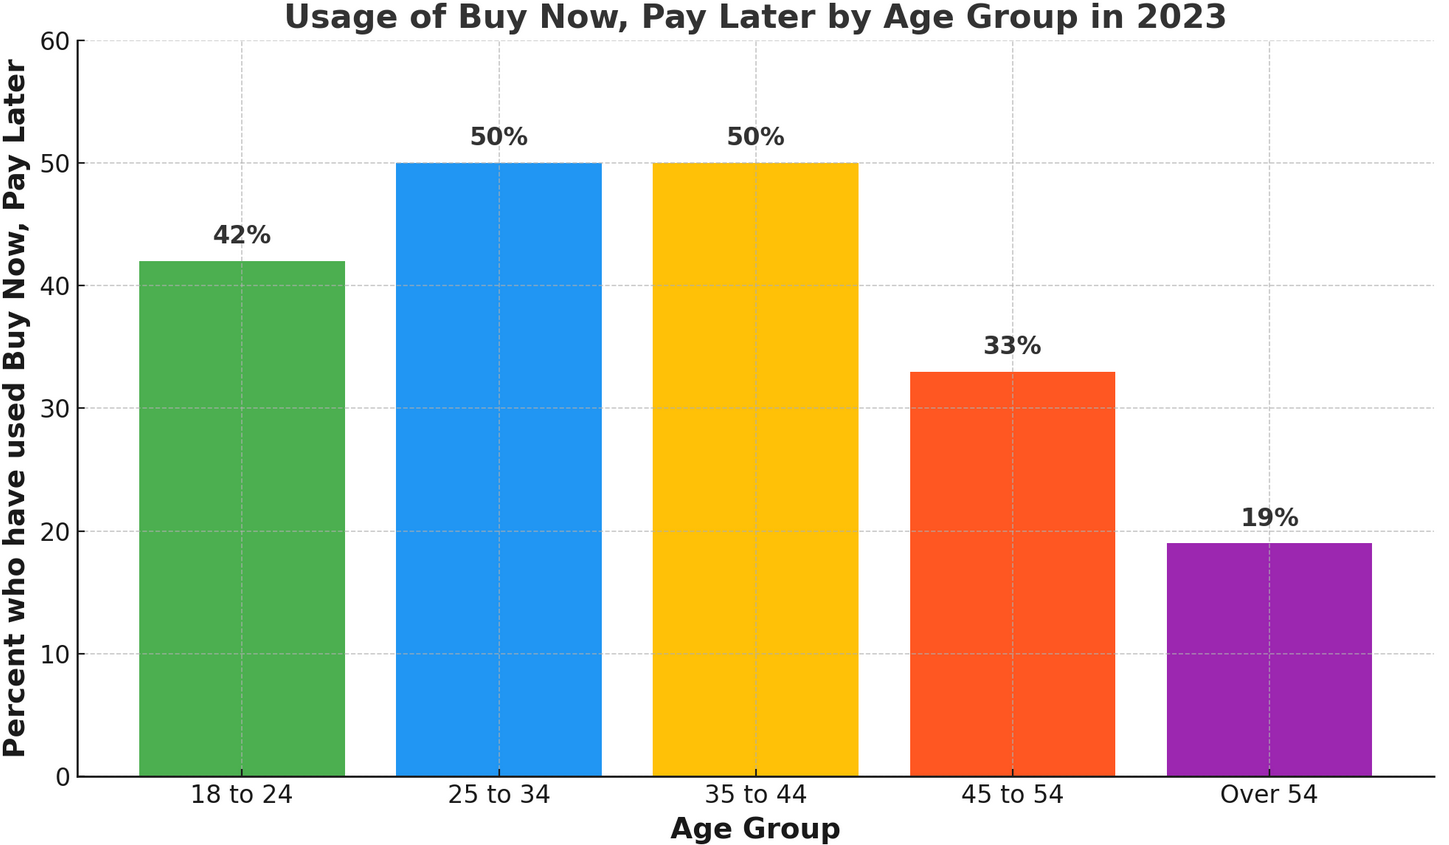 Buy Now, Pay Later Services: A Look at Usage Across Age Groups in 2023